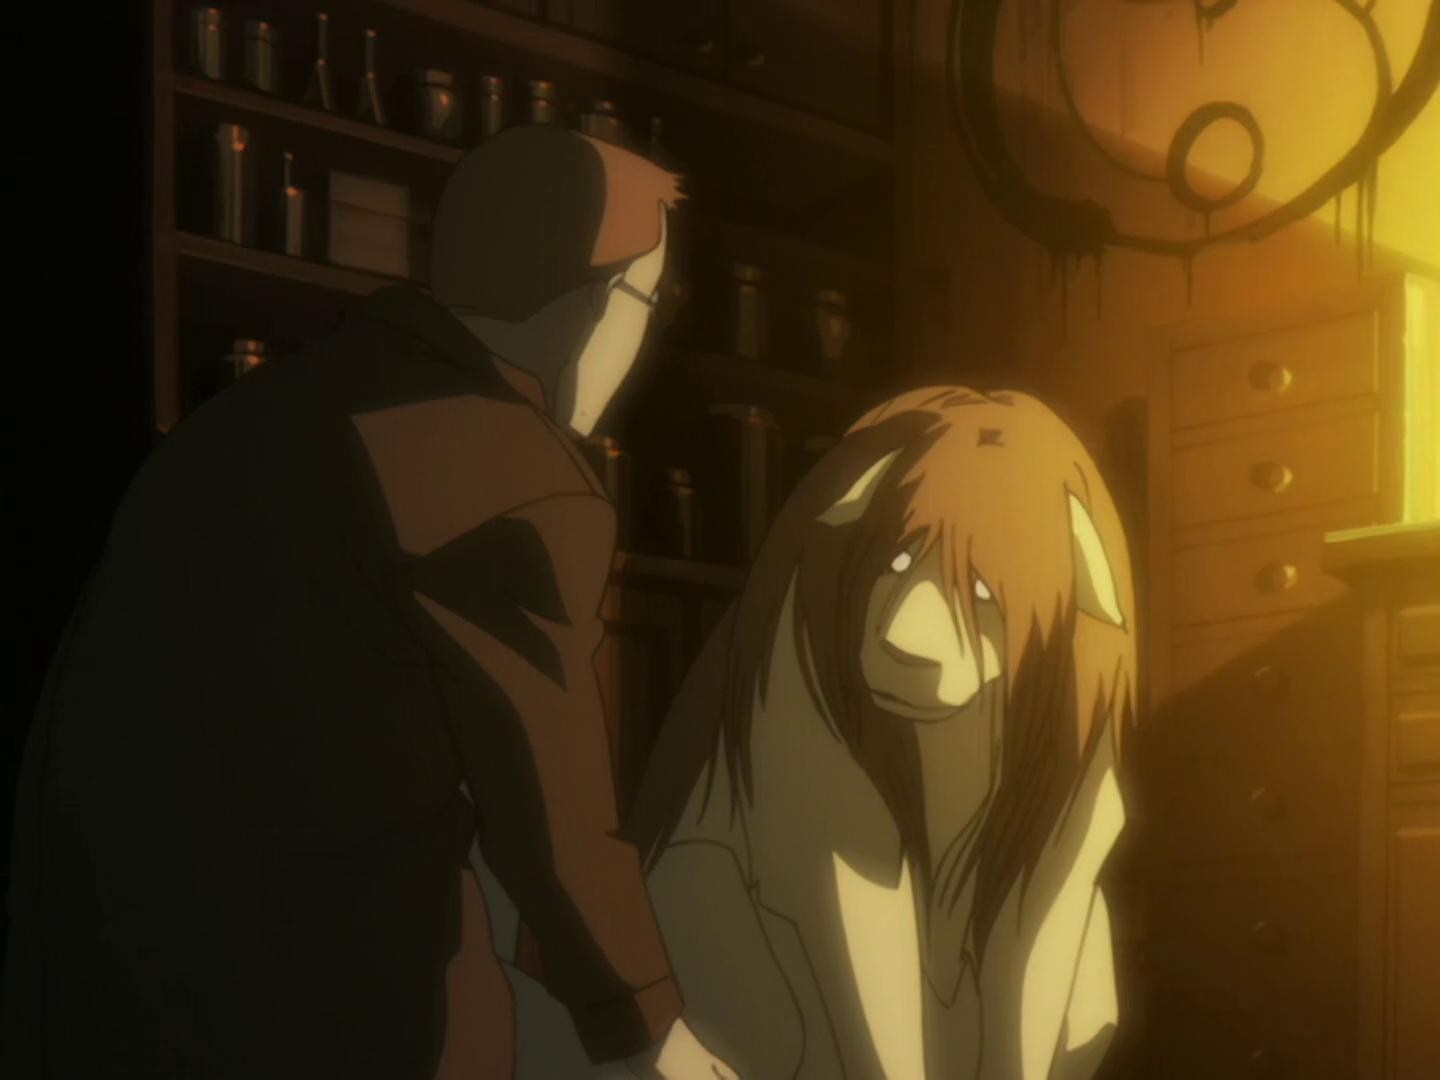 shou tucker fuses his daughter and his dog (anime - Fullmetal Alchemist)